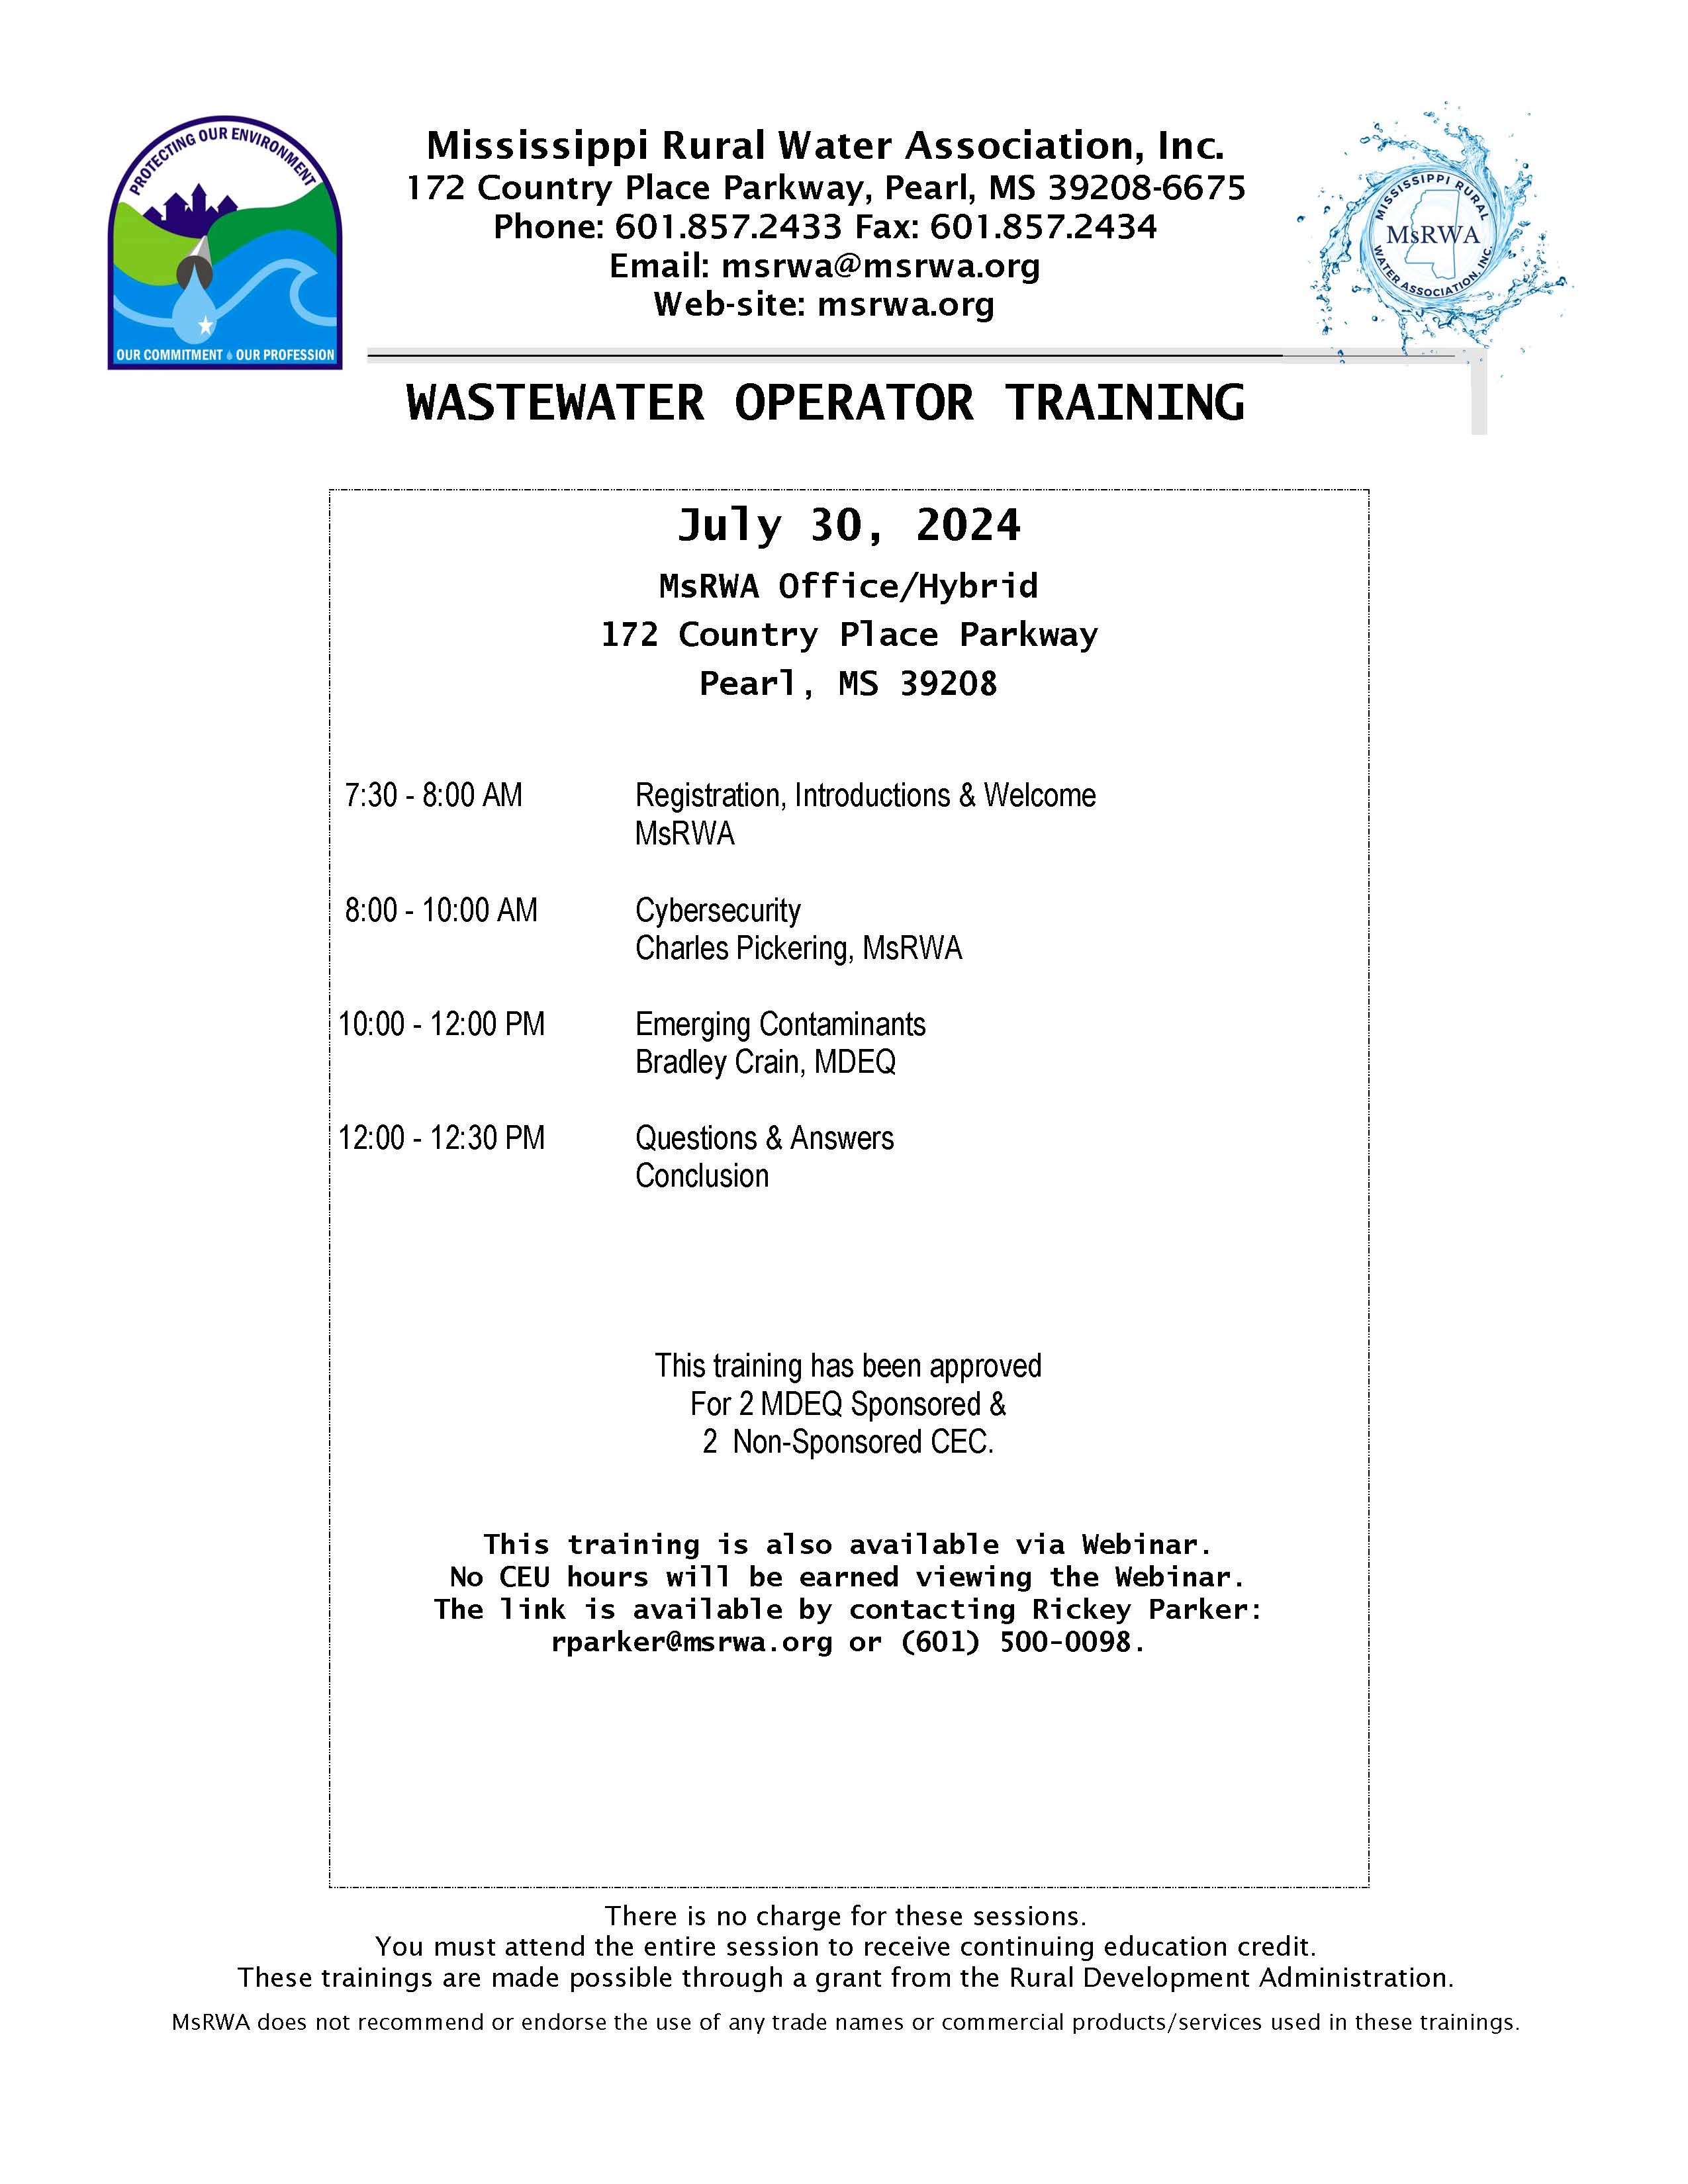 Wastewater Operator Training - 2S/2NS - Pearl @ MsRWA Office